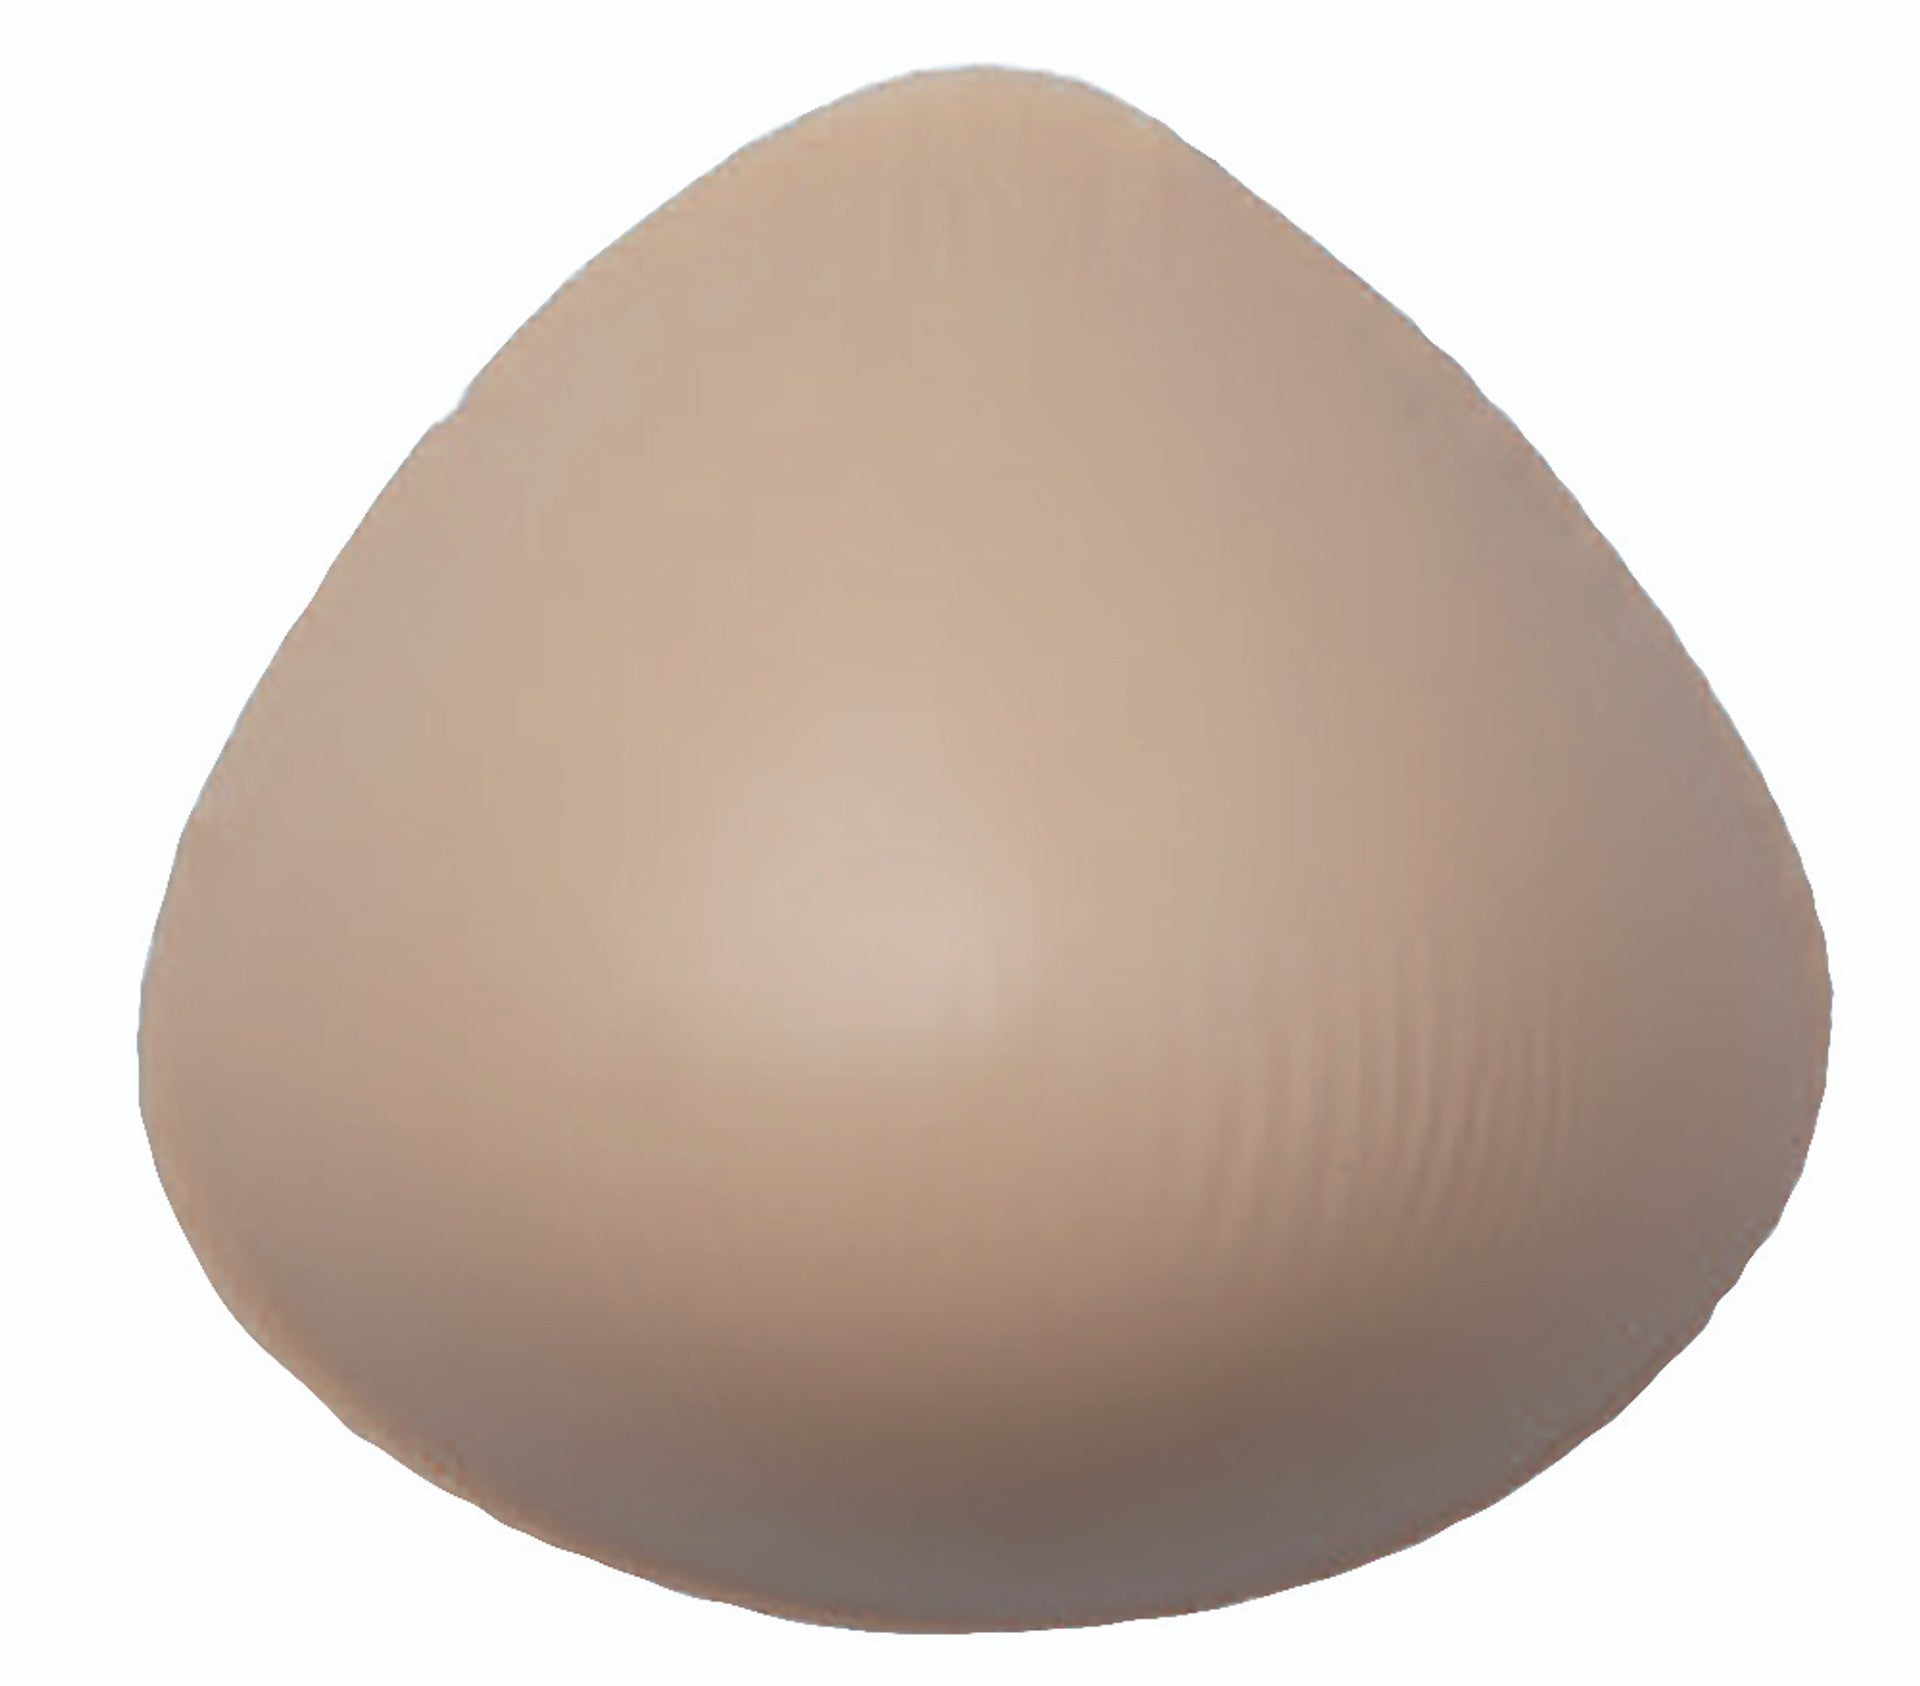 #395 Extra Lightweight Semi-Full Triangle Silicone Mastectomy Breast Form,  in Beige Sold as Each